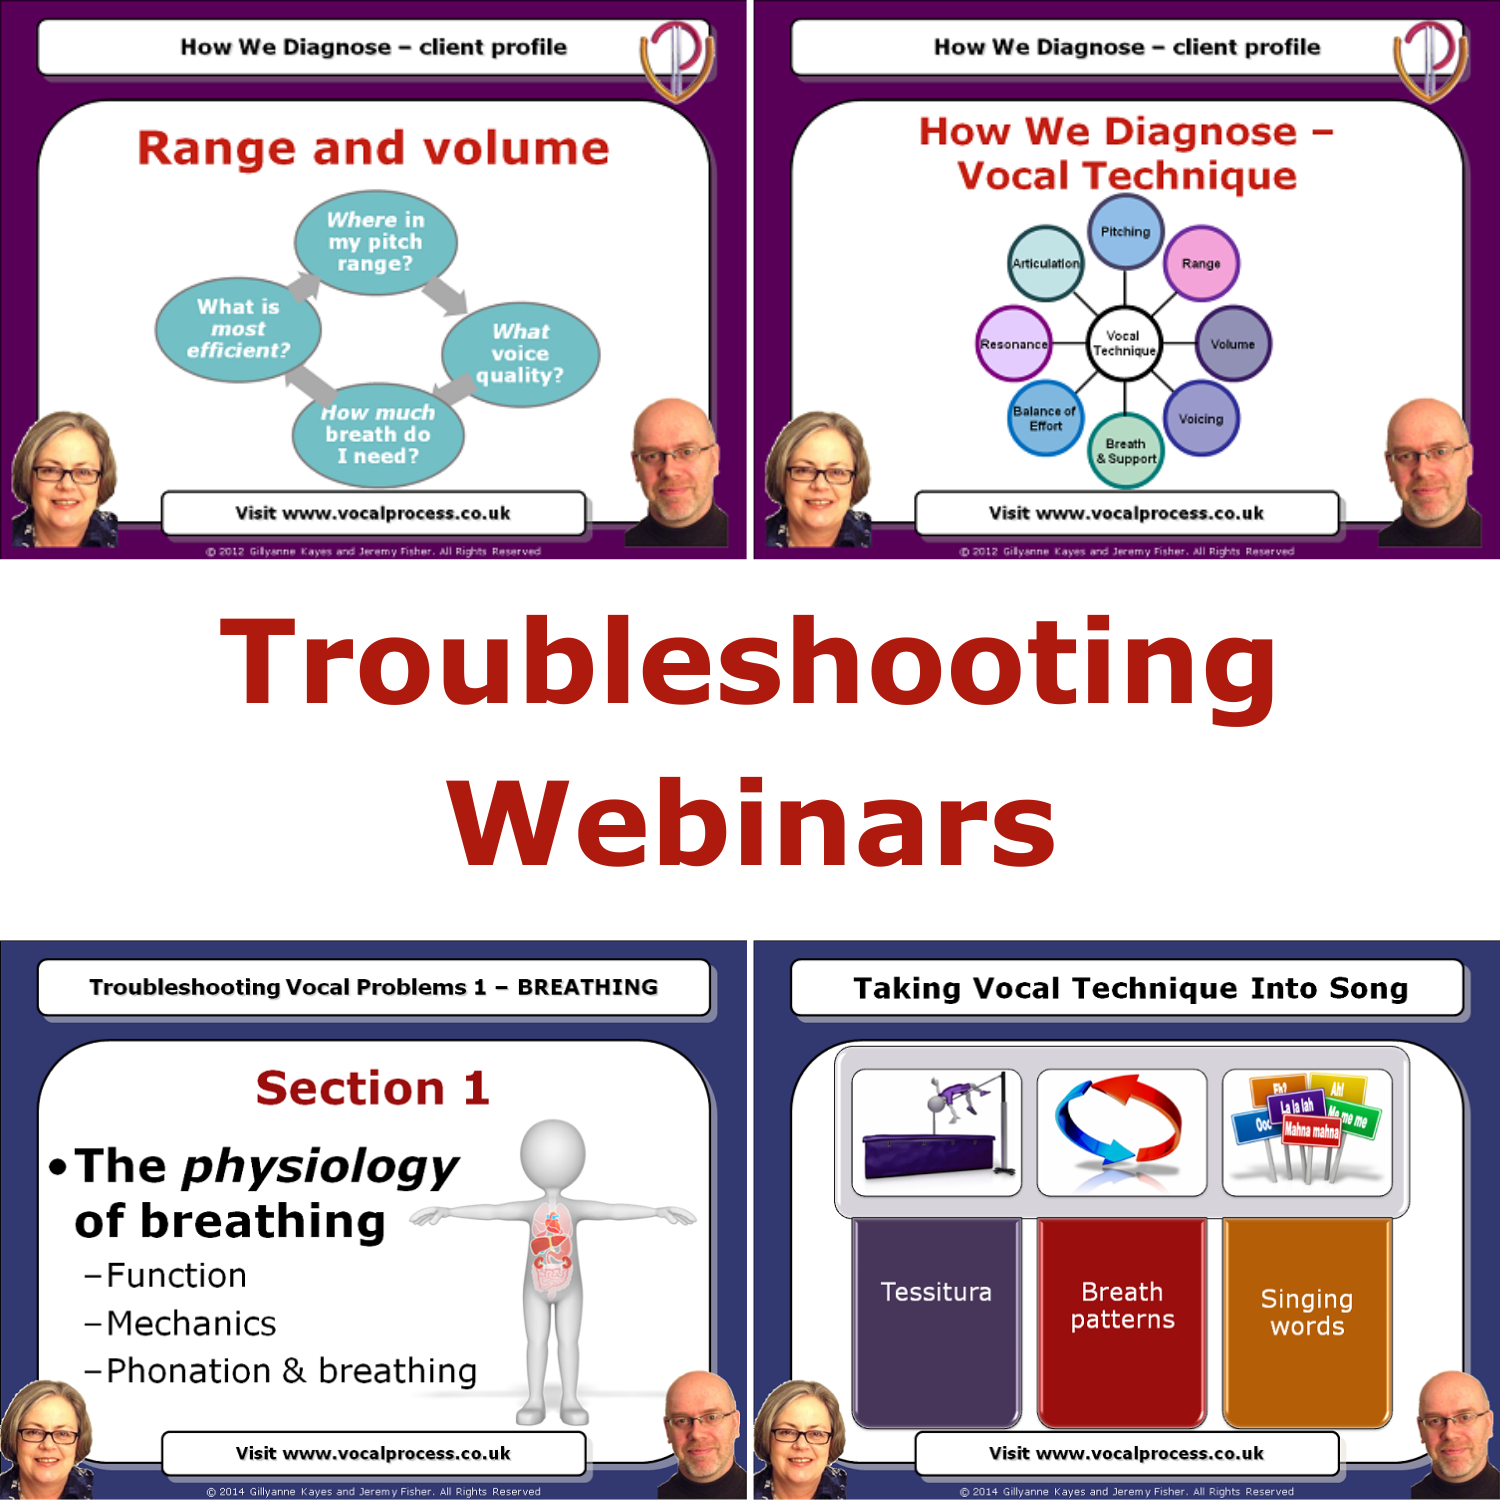 Four professional development Webinars created by Gillyanne Kayes and Jeremy Fisher